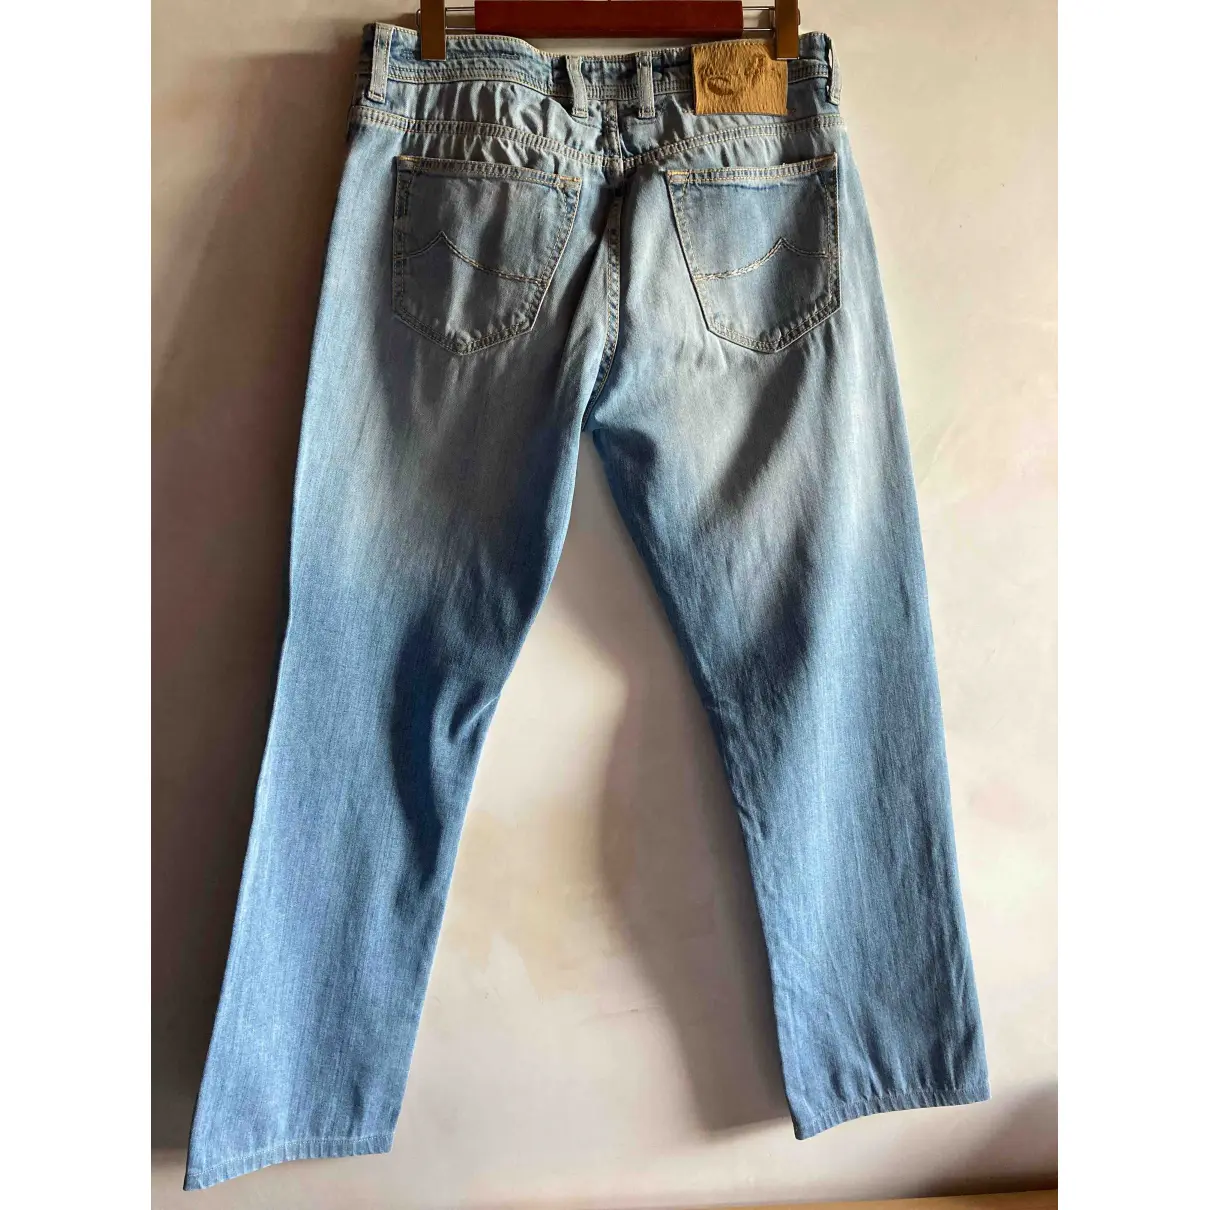 Buy Jacob & Co Straight jeans online